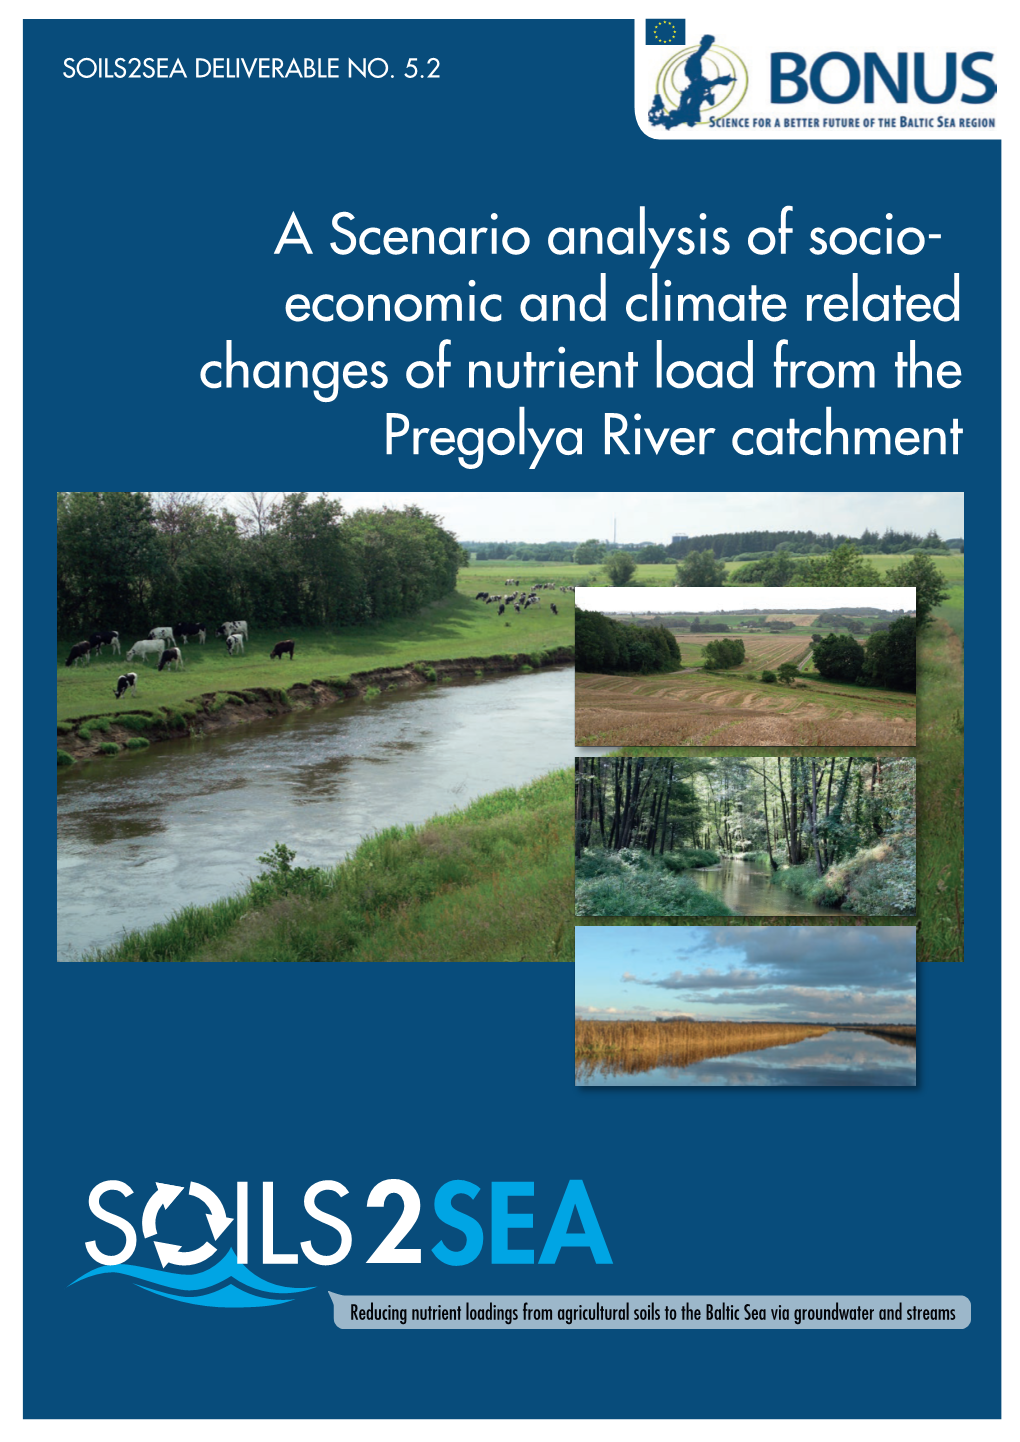 A Scenario Analysis of Socio- Economic and Climate Related Changes of Nutrient Load from the Pregolya River Catchment